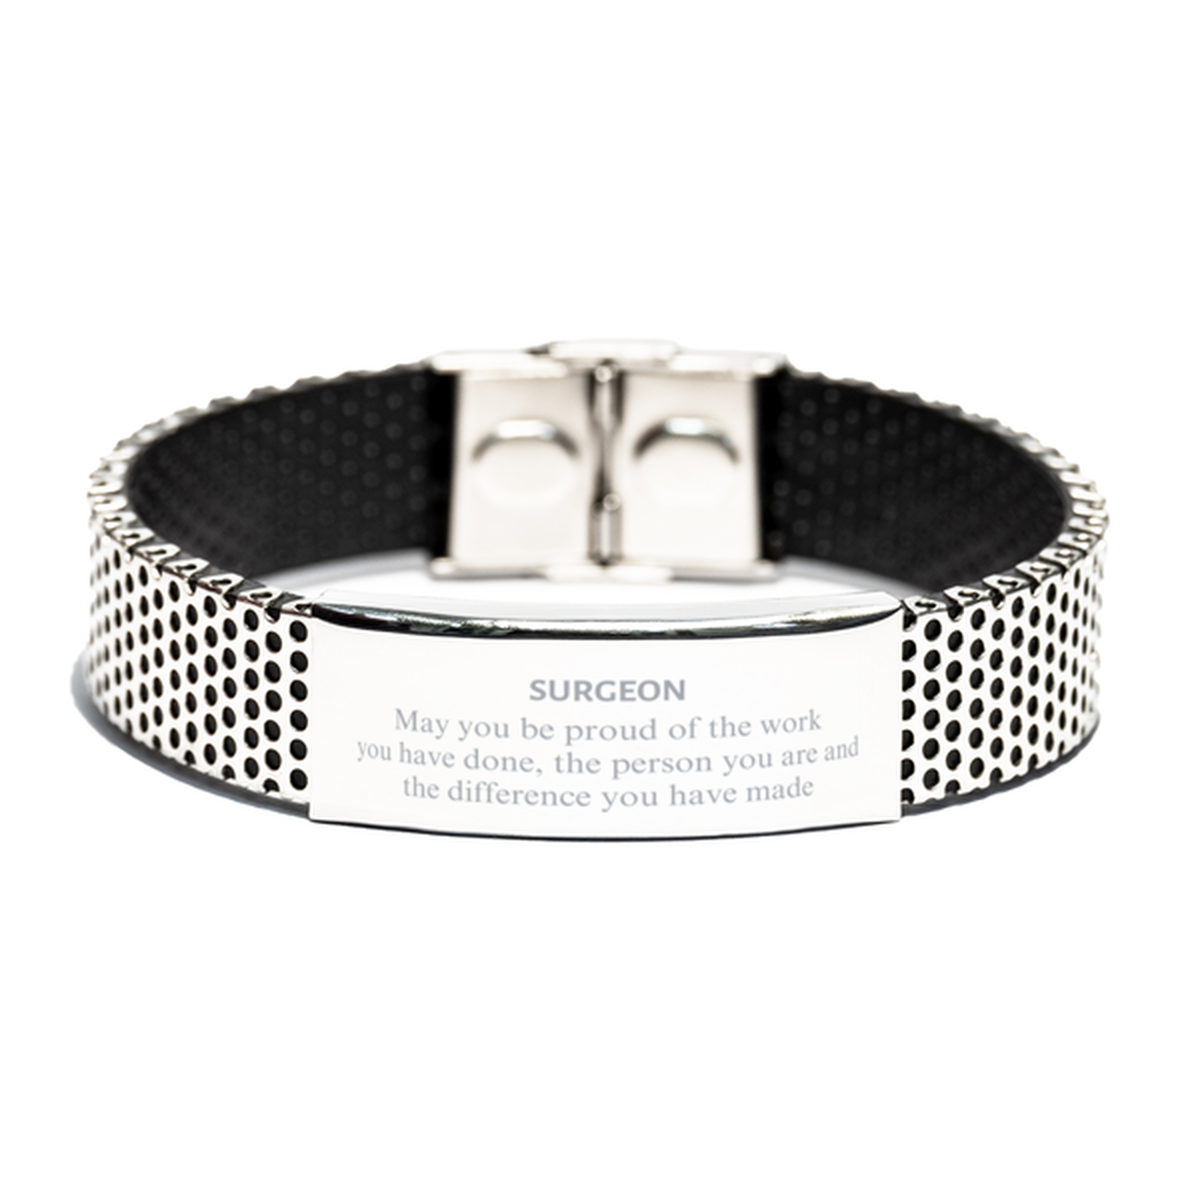 Surgeon May you be proud of the work you have done, Retirement Surgeon Stainless Steel Bracelet for Colleague Appreciation Gifts Amazing for Surgeon